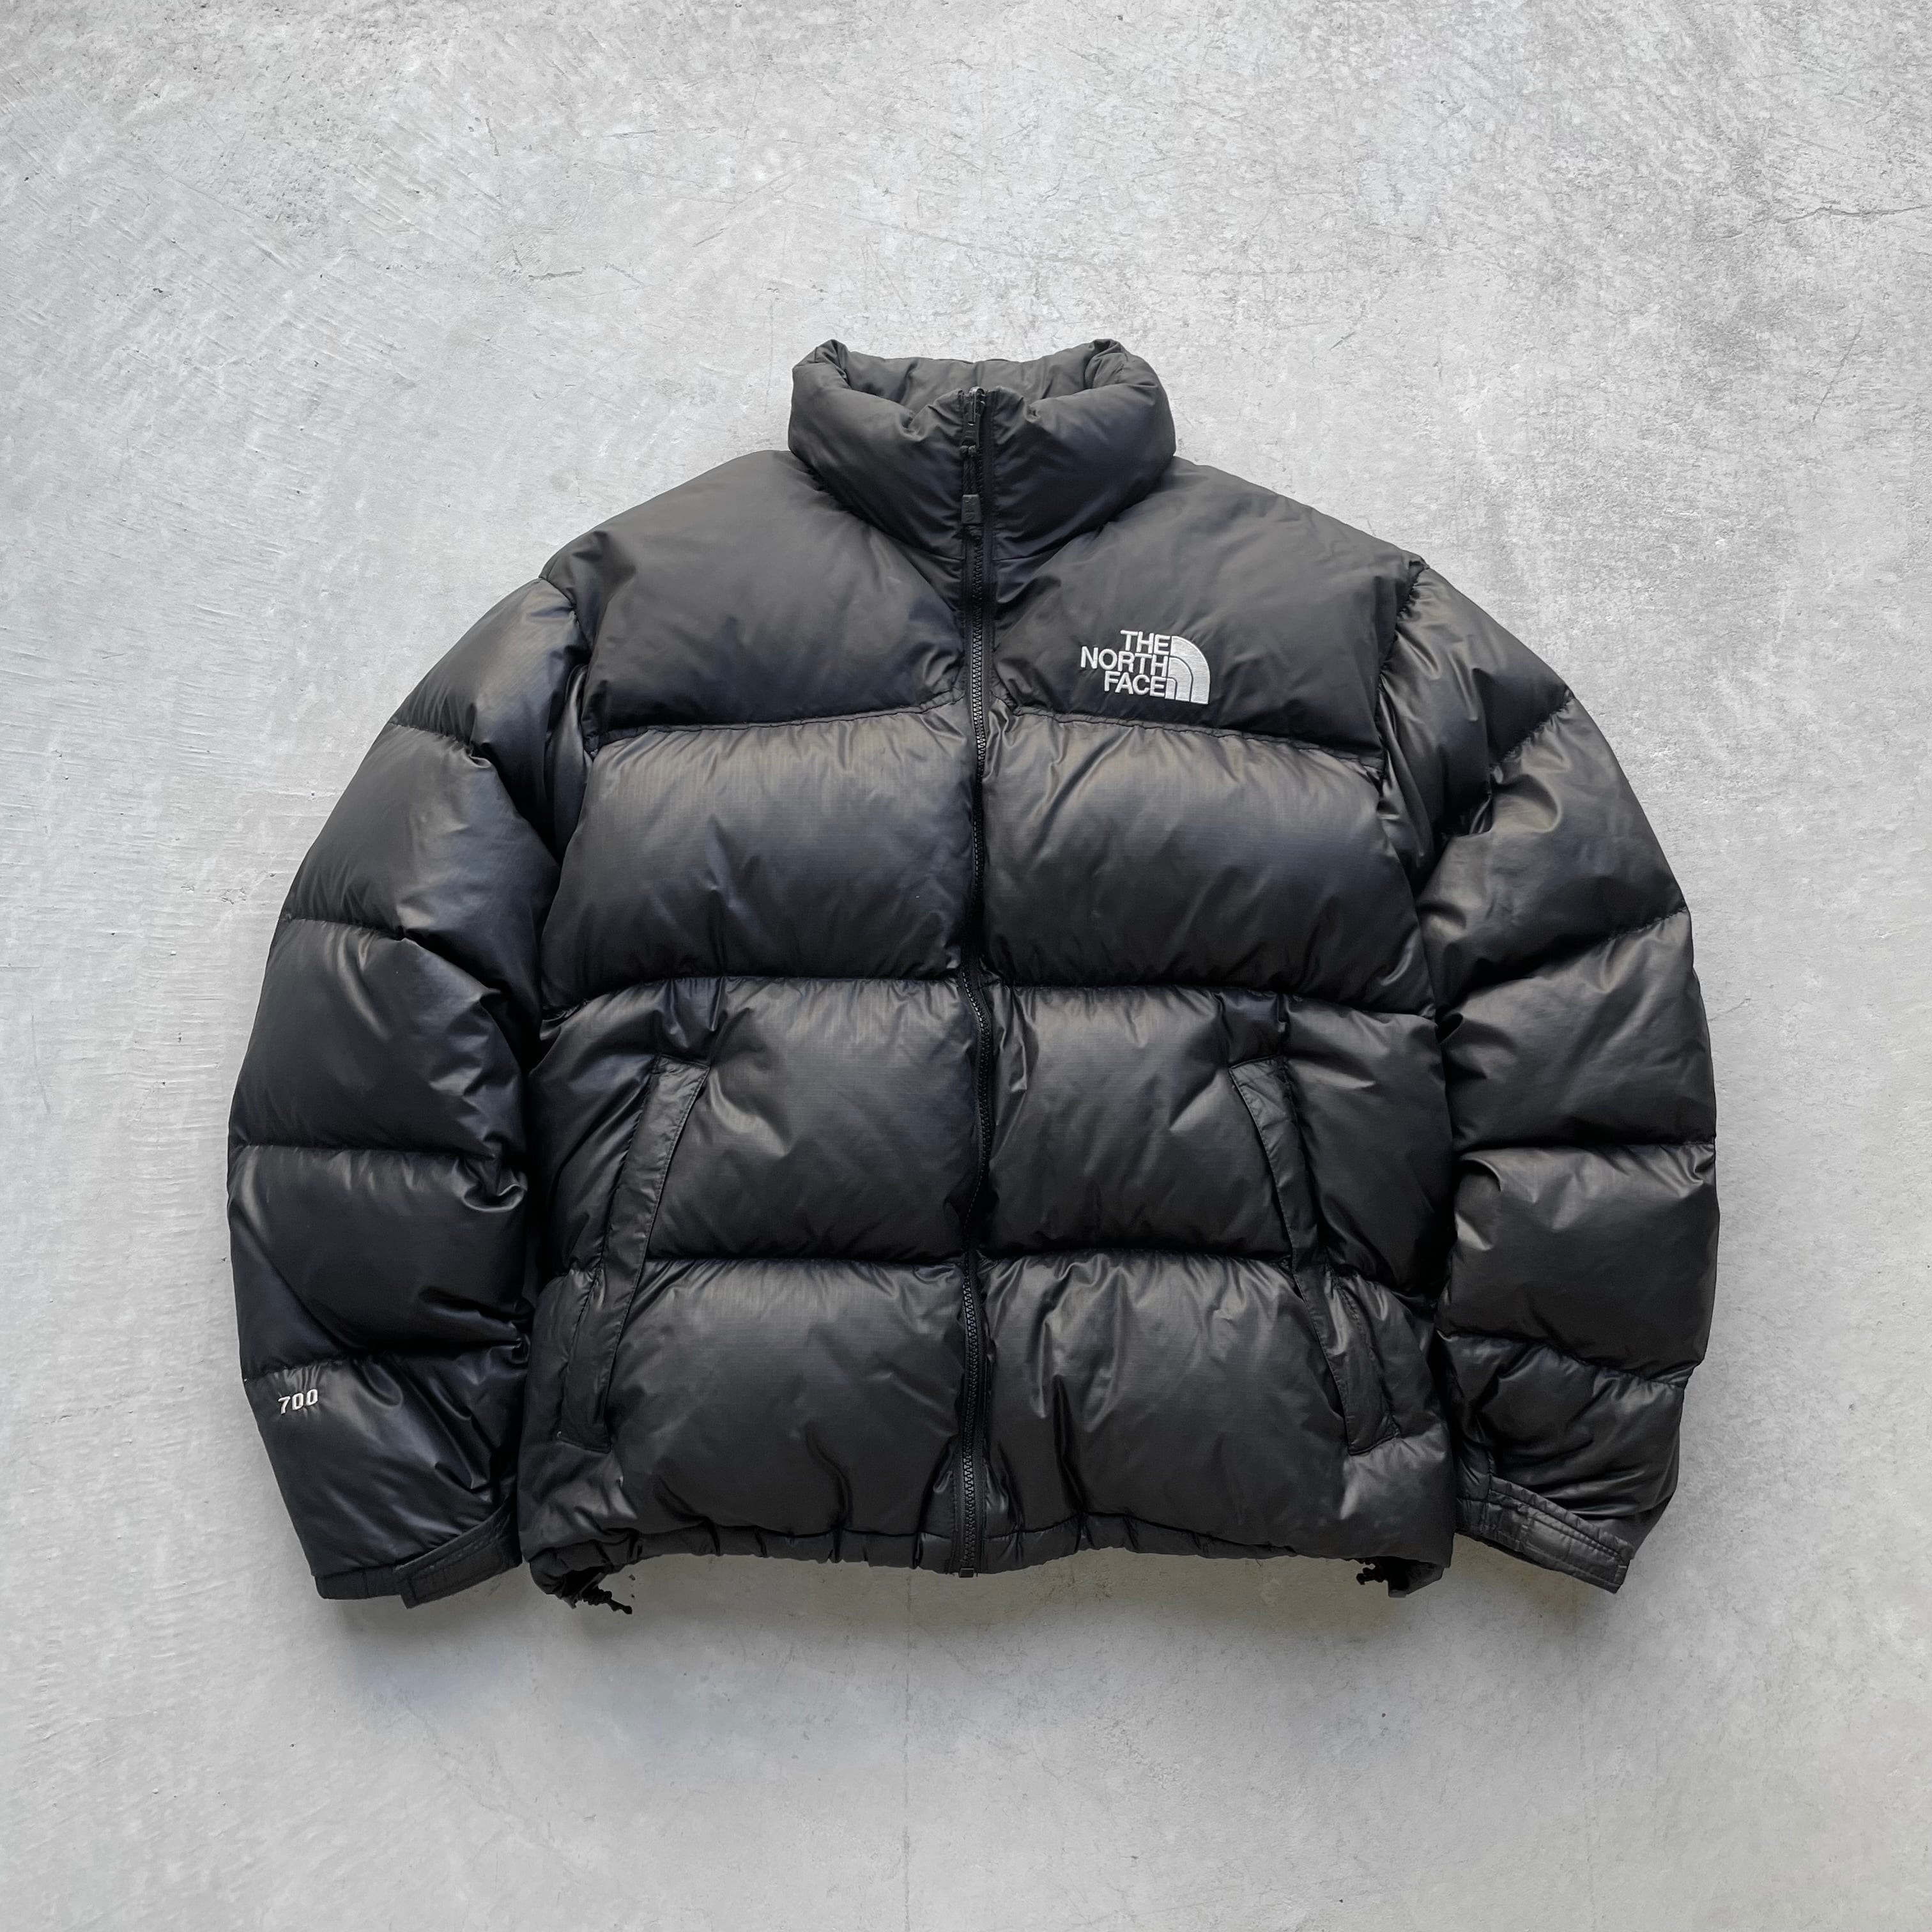 THE NORTH FACE | Seek the online